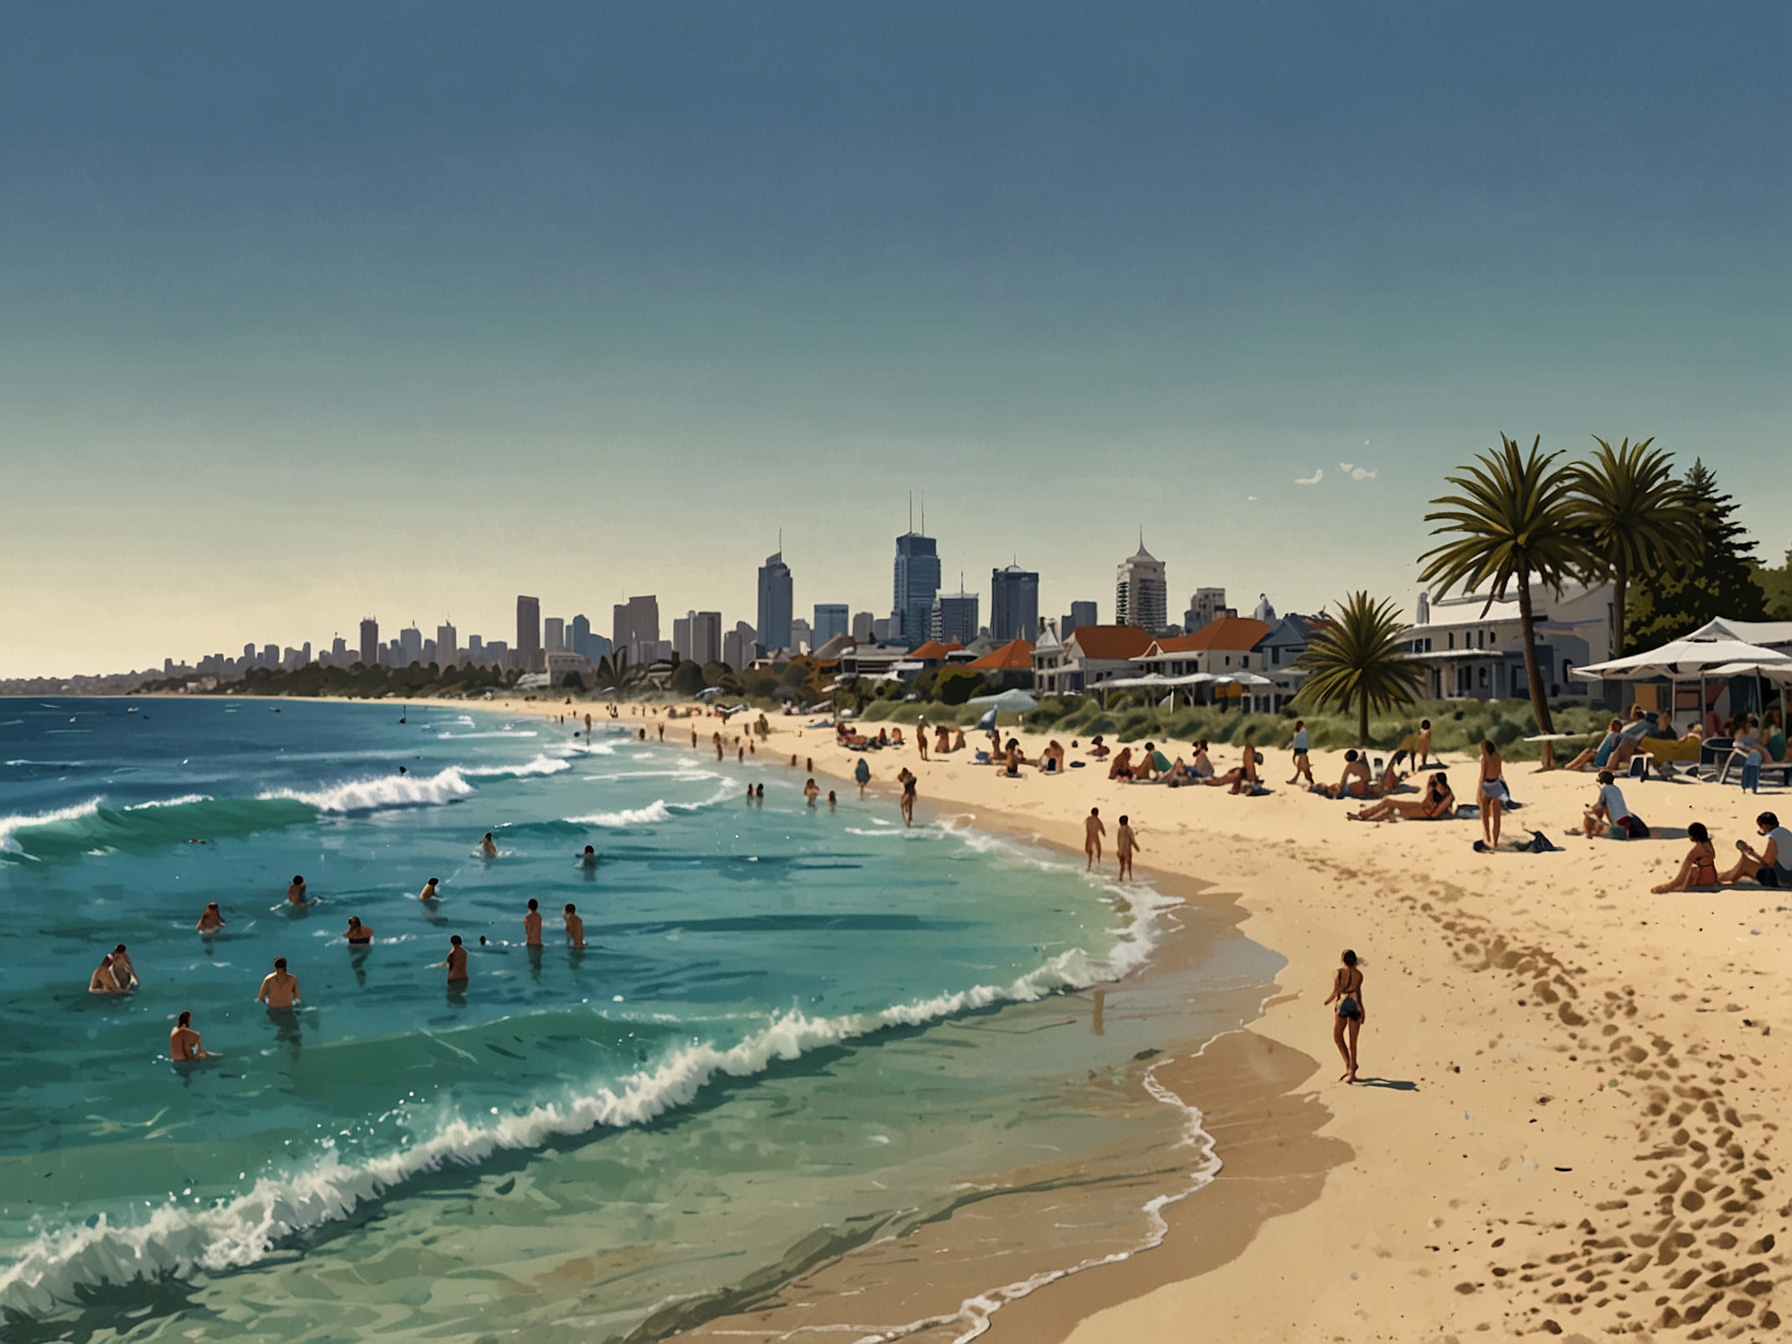 A sunny day at Cottesloe Beach, Perth, with crystal-clear waters and golden sand, where visitors lounge and savor fresh seafood. The backdrop features the picturesque Perth city skyline.